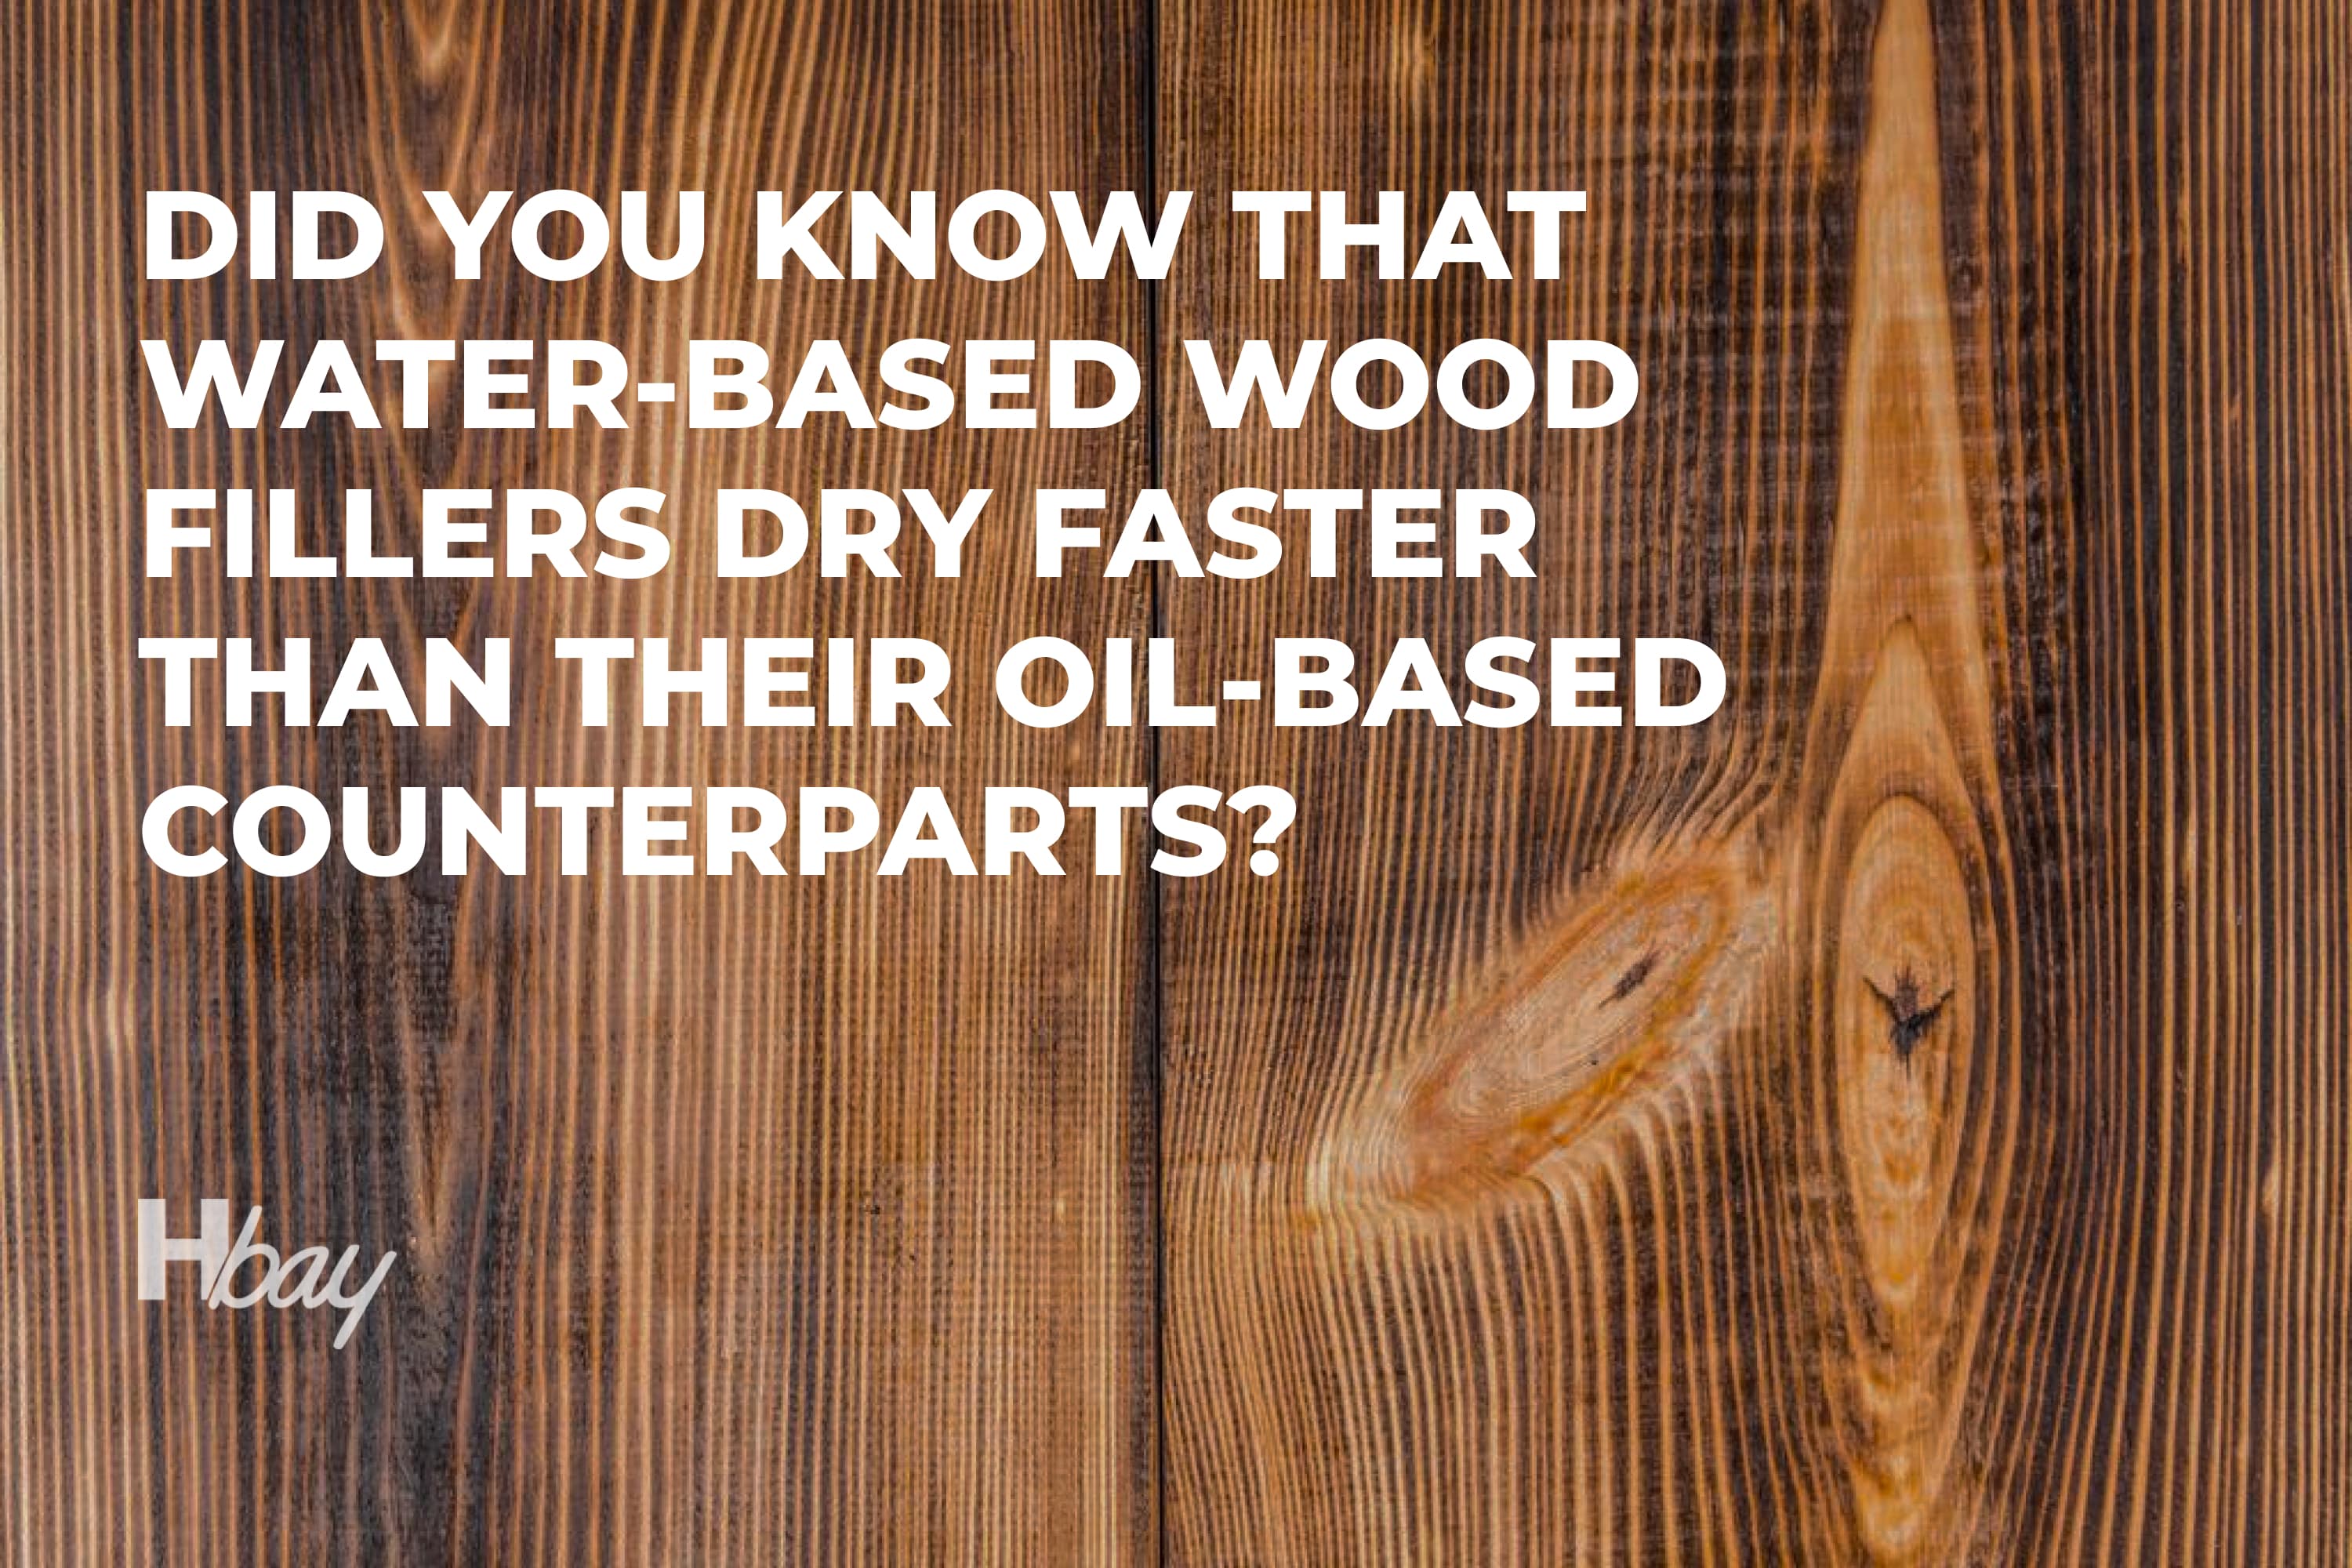 Did you know that water based wood fillers dry faster than their oil based counterparts